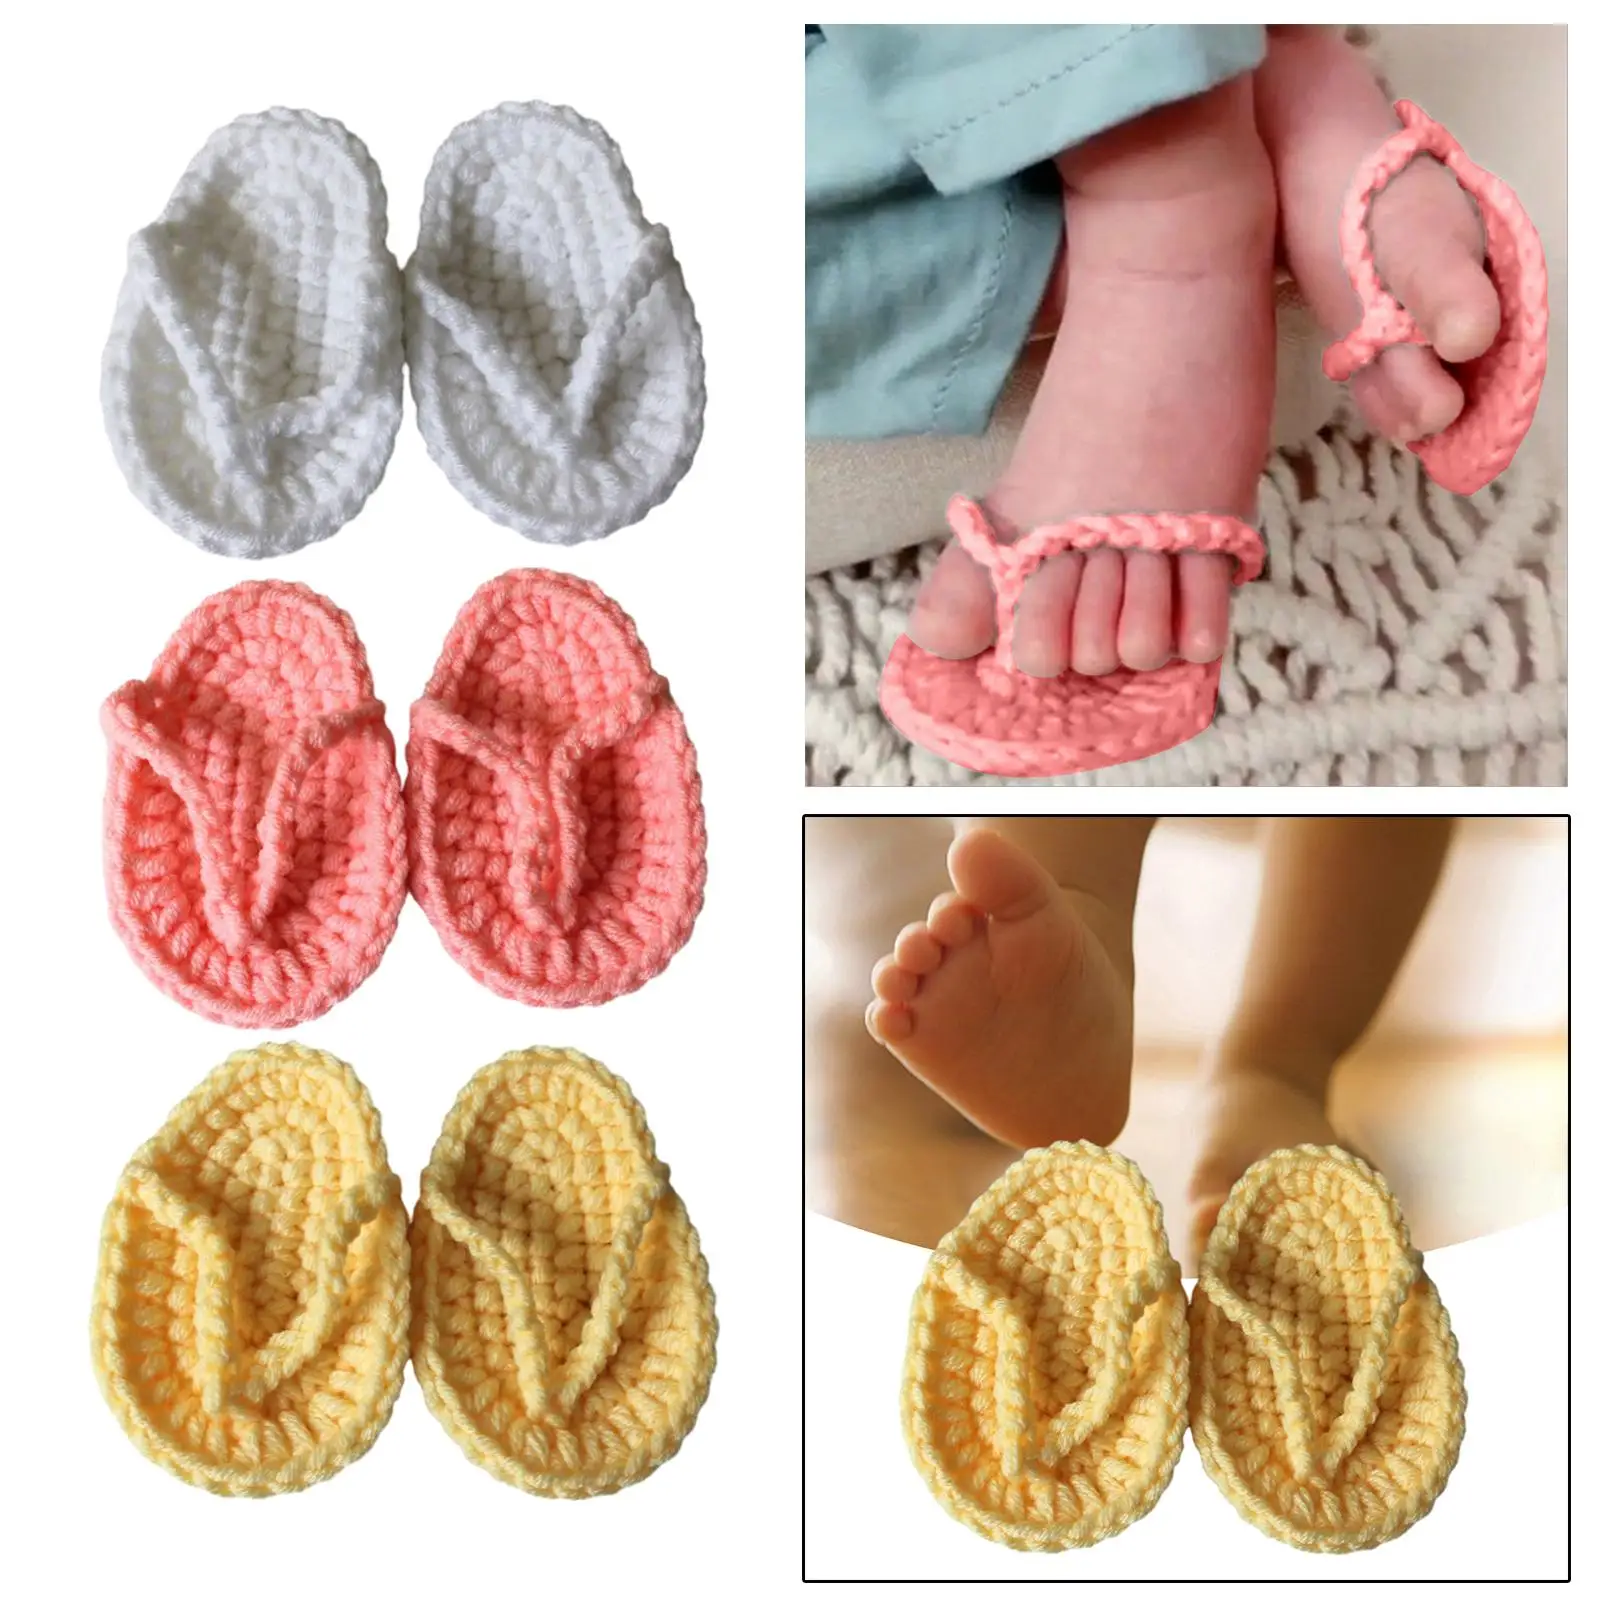 Infant Slippers Newborn Props Cozy Shoes 2.75inch Hand Knitting for Newborn Infant Baby Decors Crochet Solid Baby Slippers 1Pair